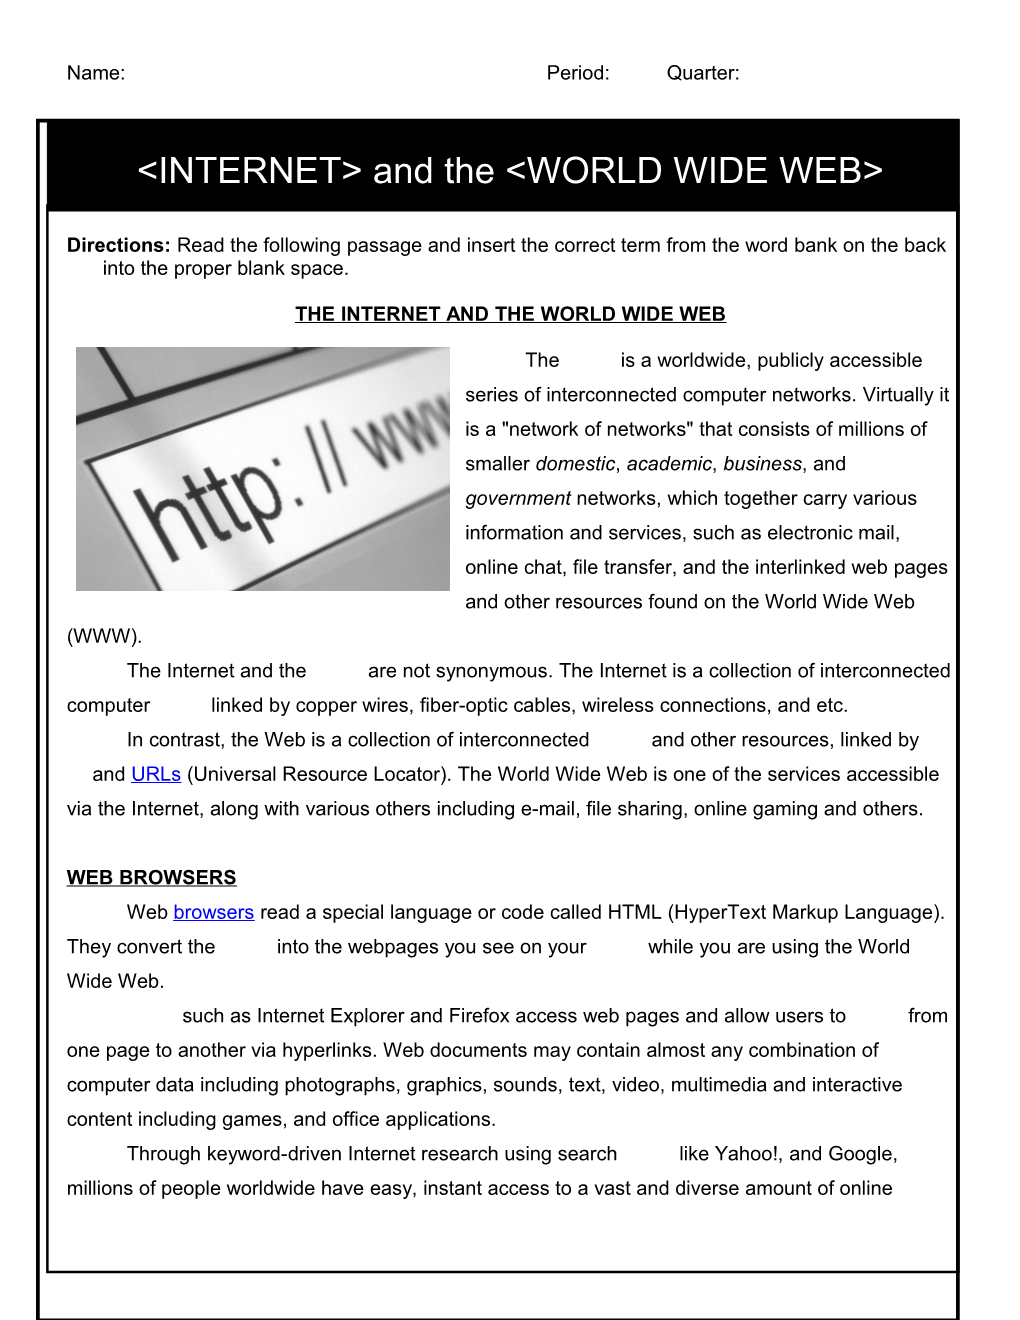 &lt;INTERNET&gt; and the &lt;WORLD WIDE WEB&gt;